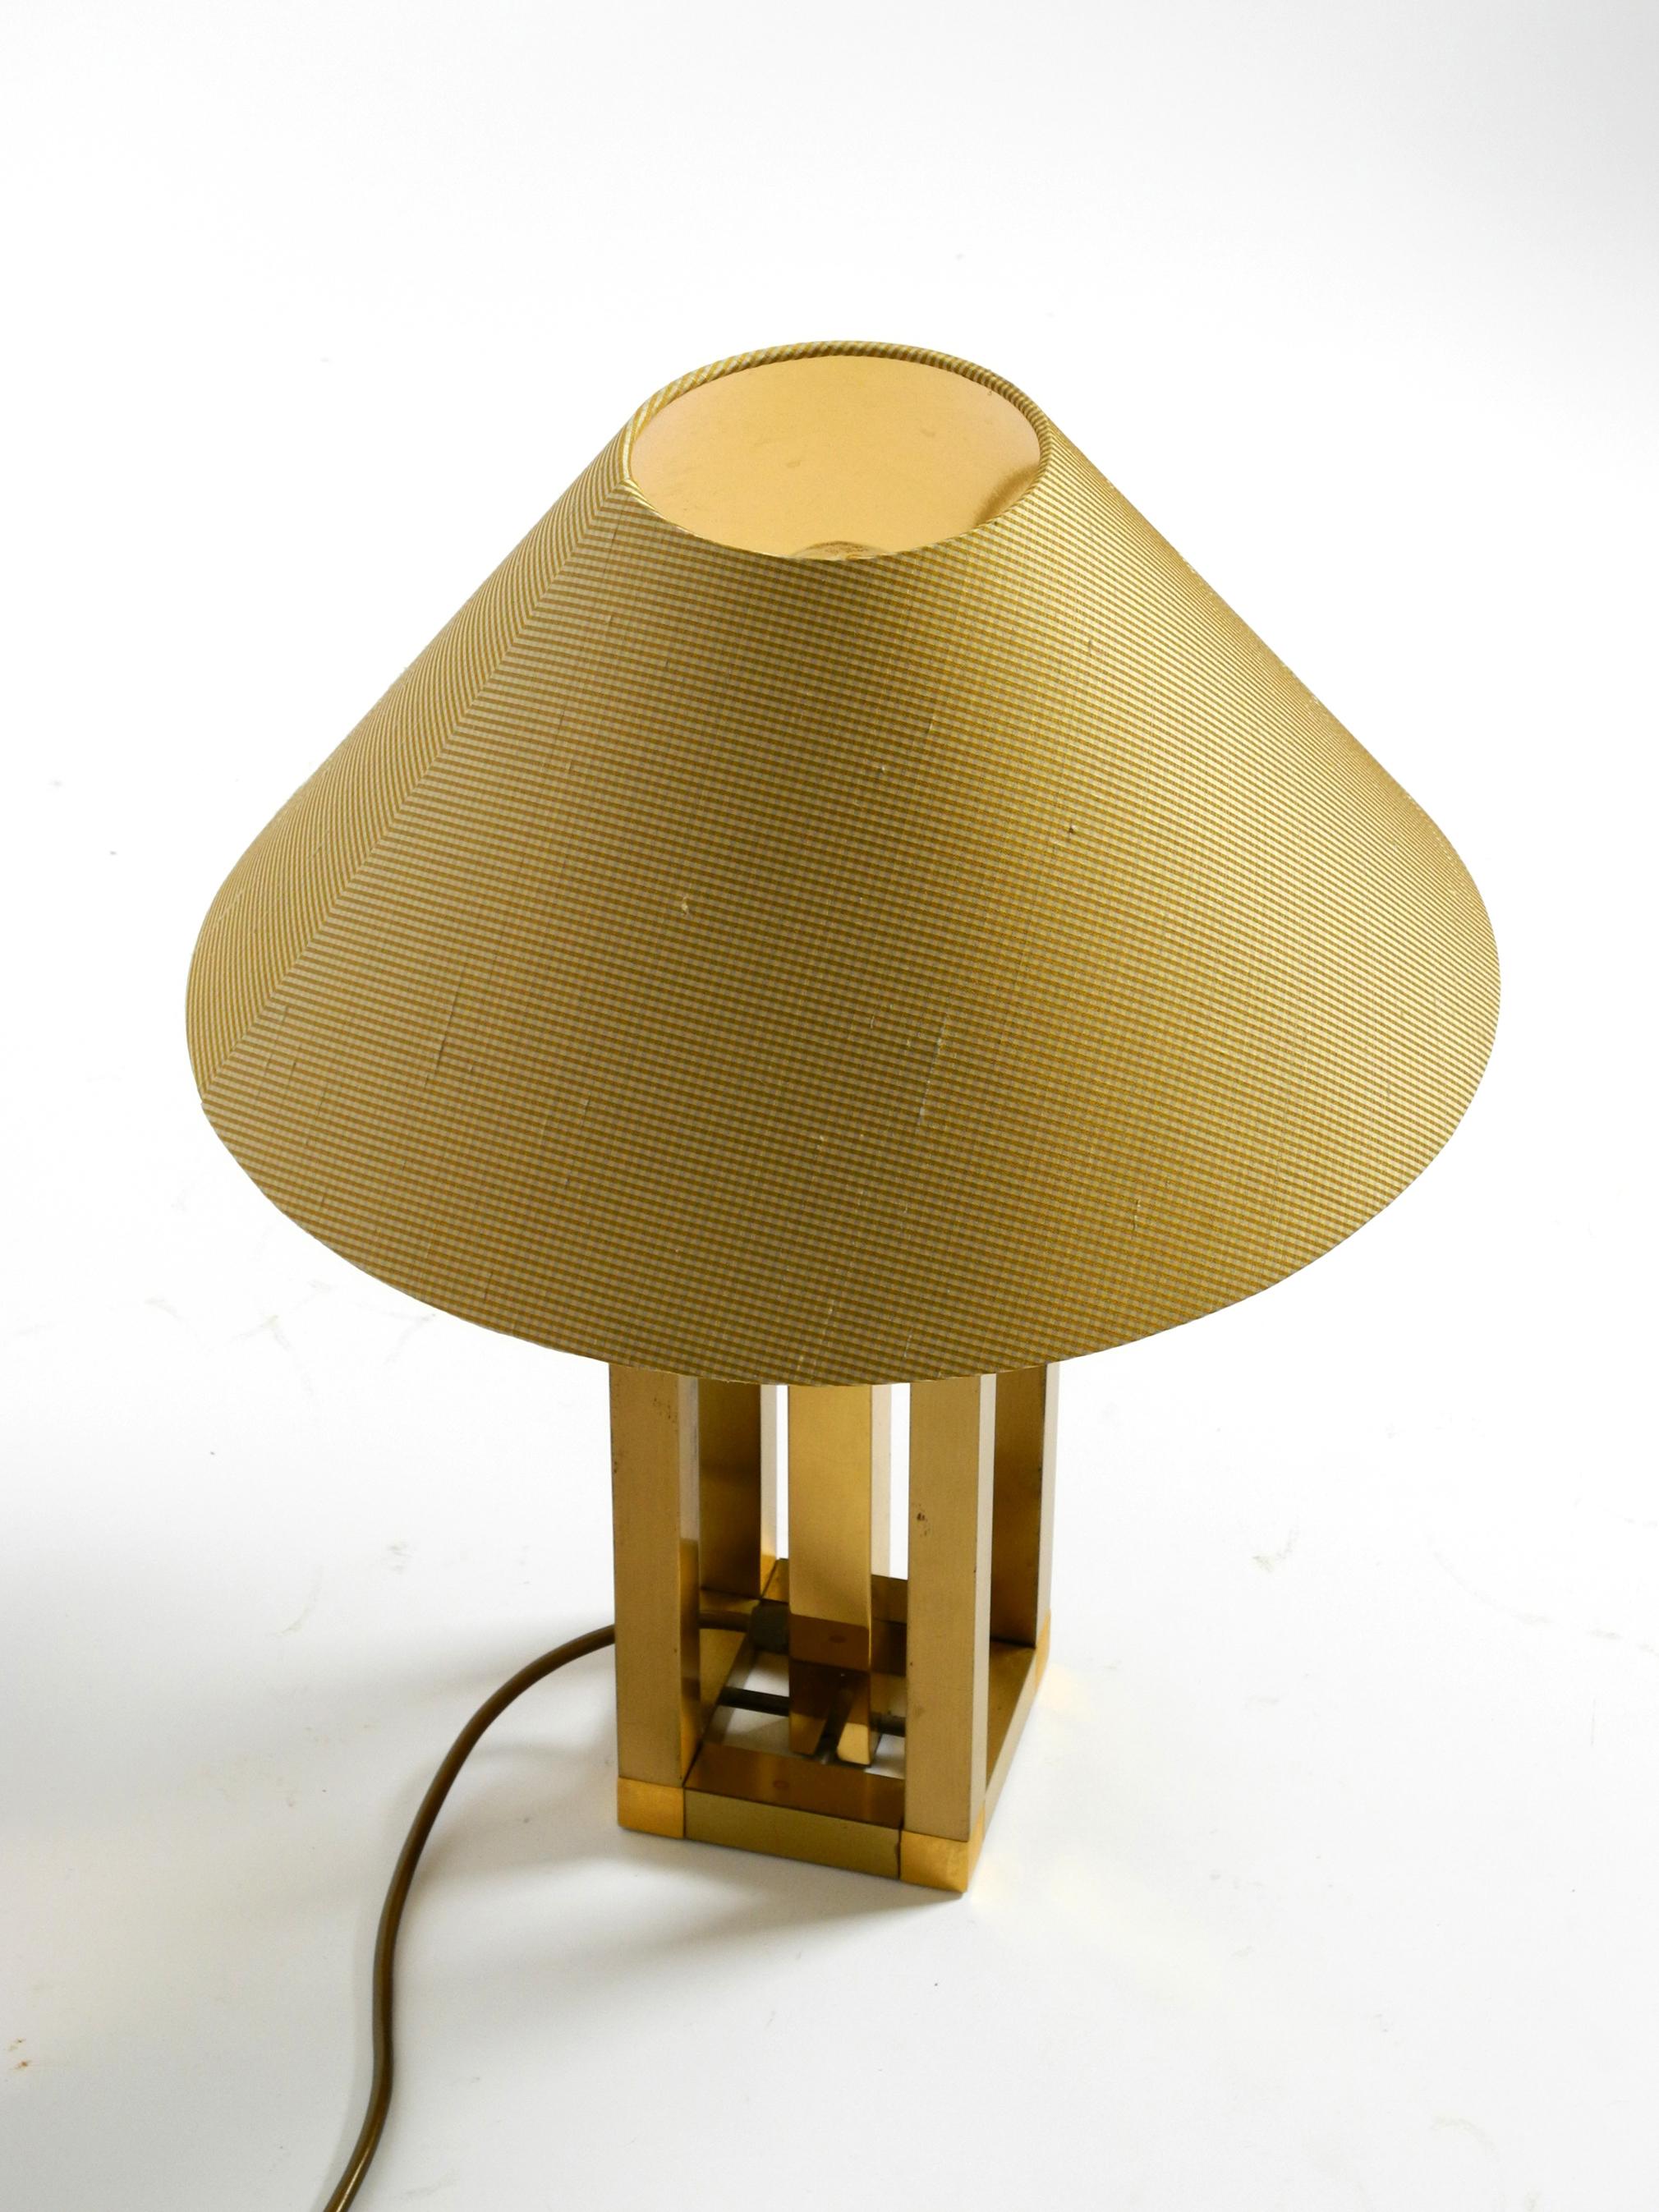 Late 20th Century Beautiful 1970s Regency Design Brass Table Lamp by Willy Rizzo for Lumica For Sale